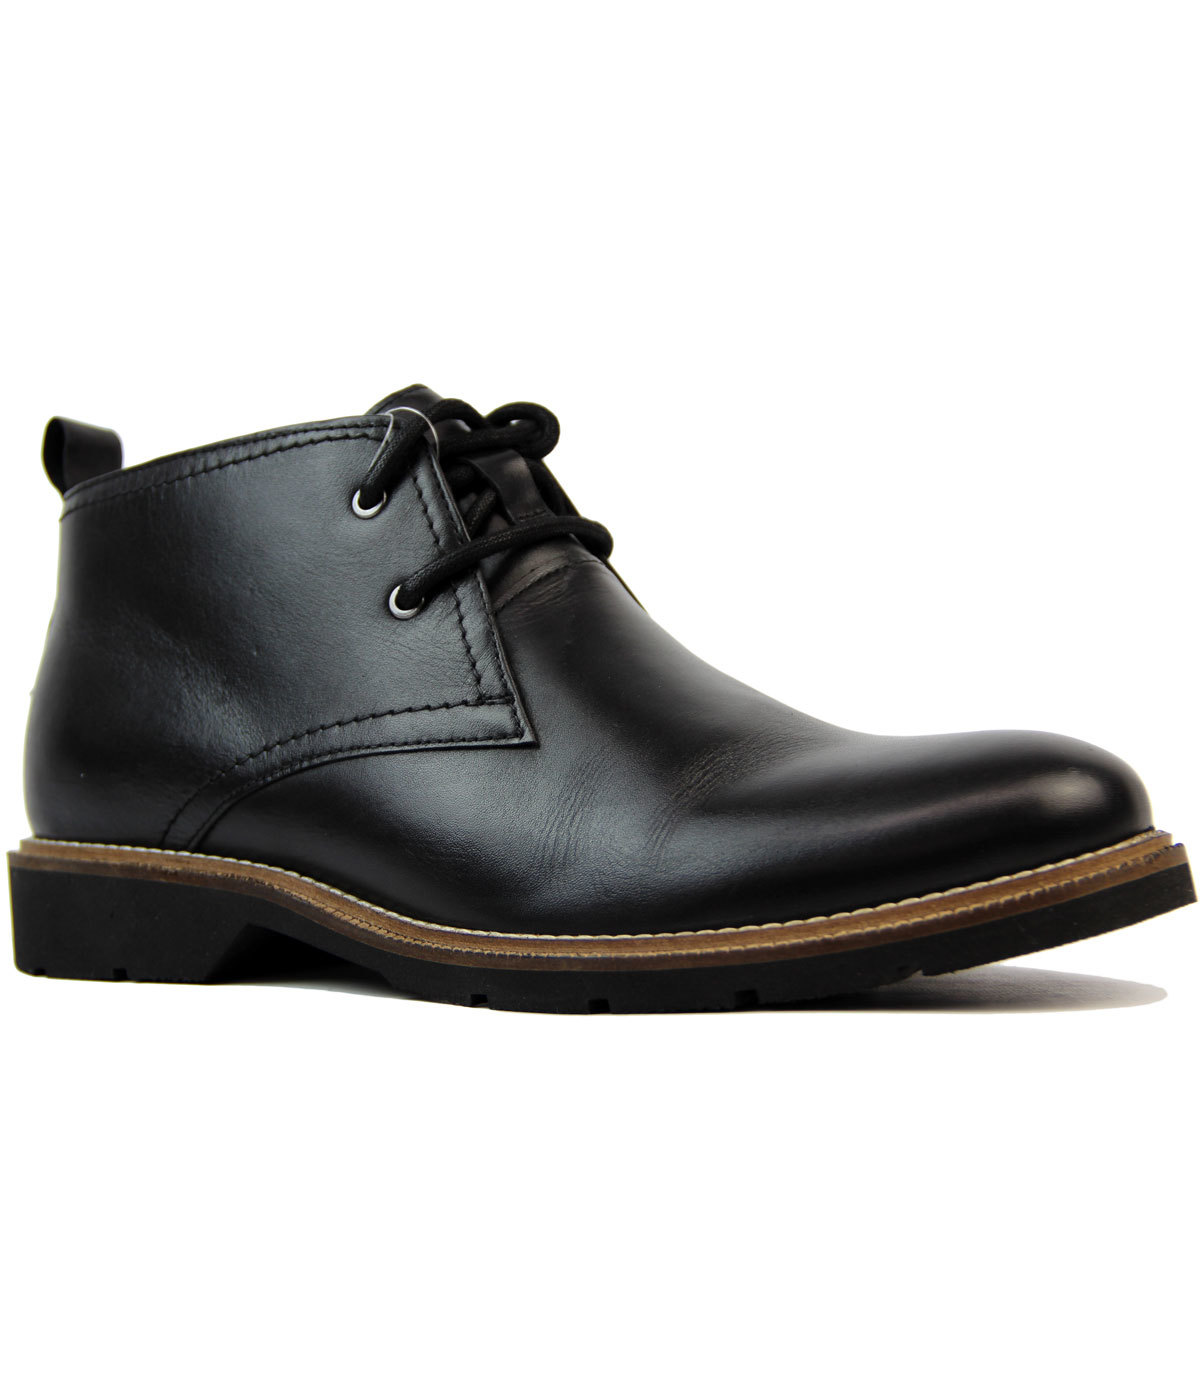 Clayton Retro 1960s Mod Smooth Leather Chukka Boots in Black